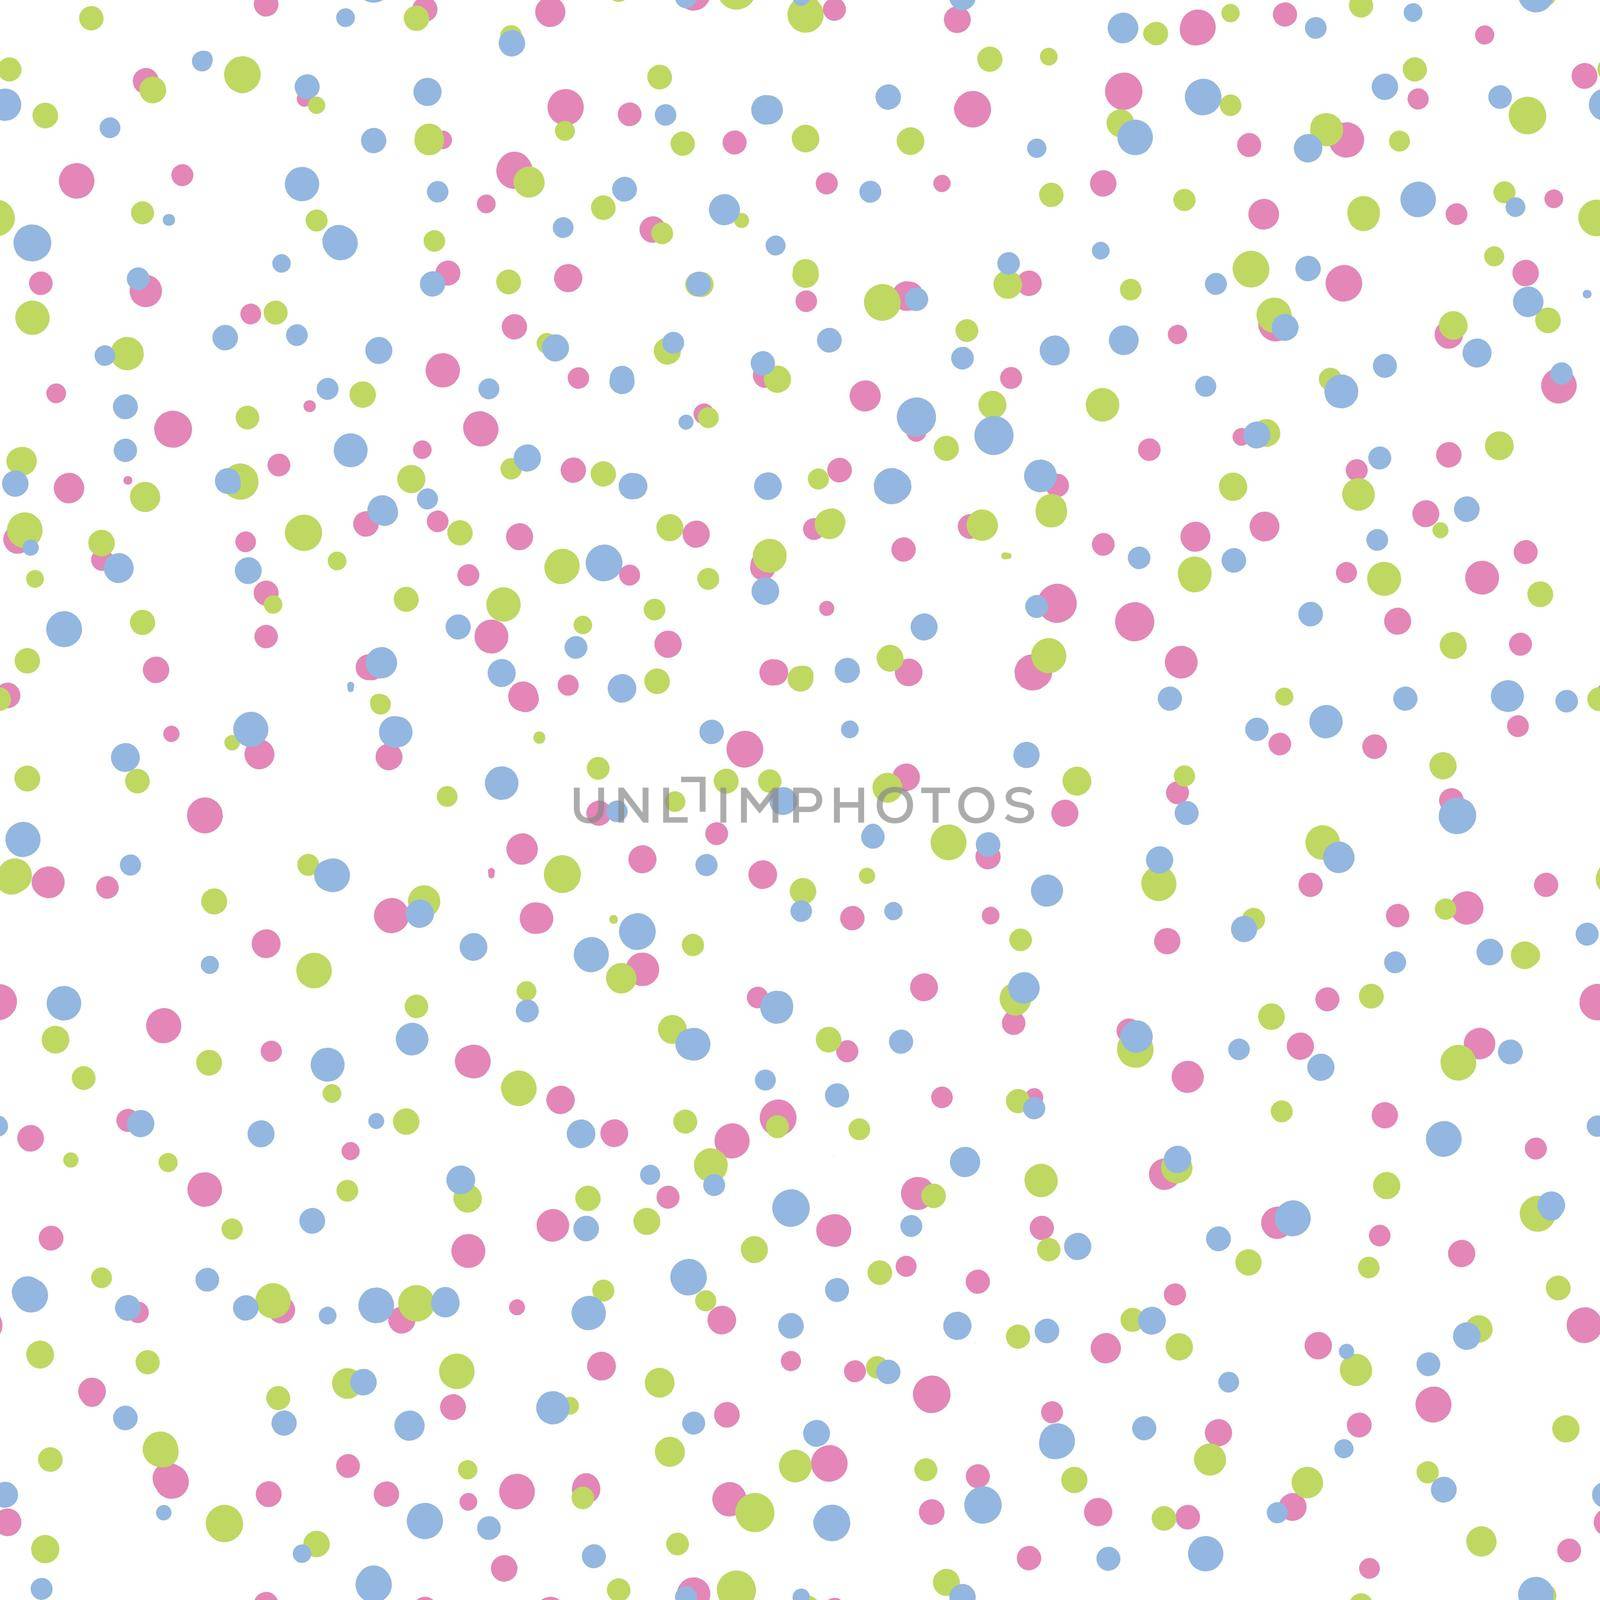 Abstract hand drown polka dots background. White seamless pattern with pink, blue circles. Template design for invitation, poster, card, flyer, banner, textile, fabric by allaku